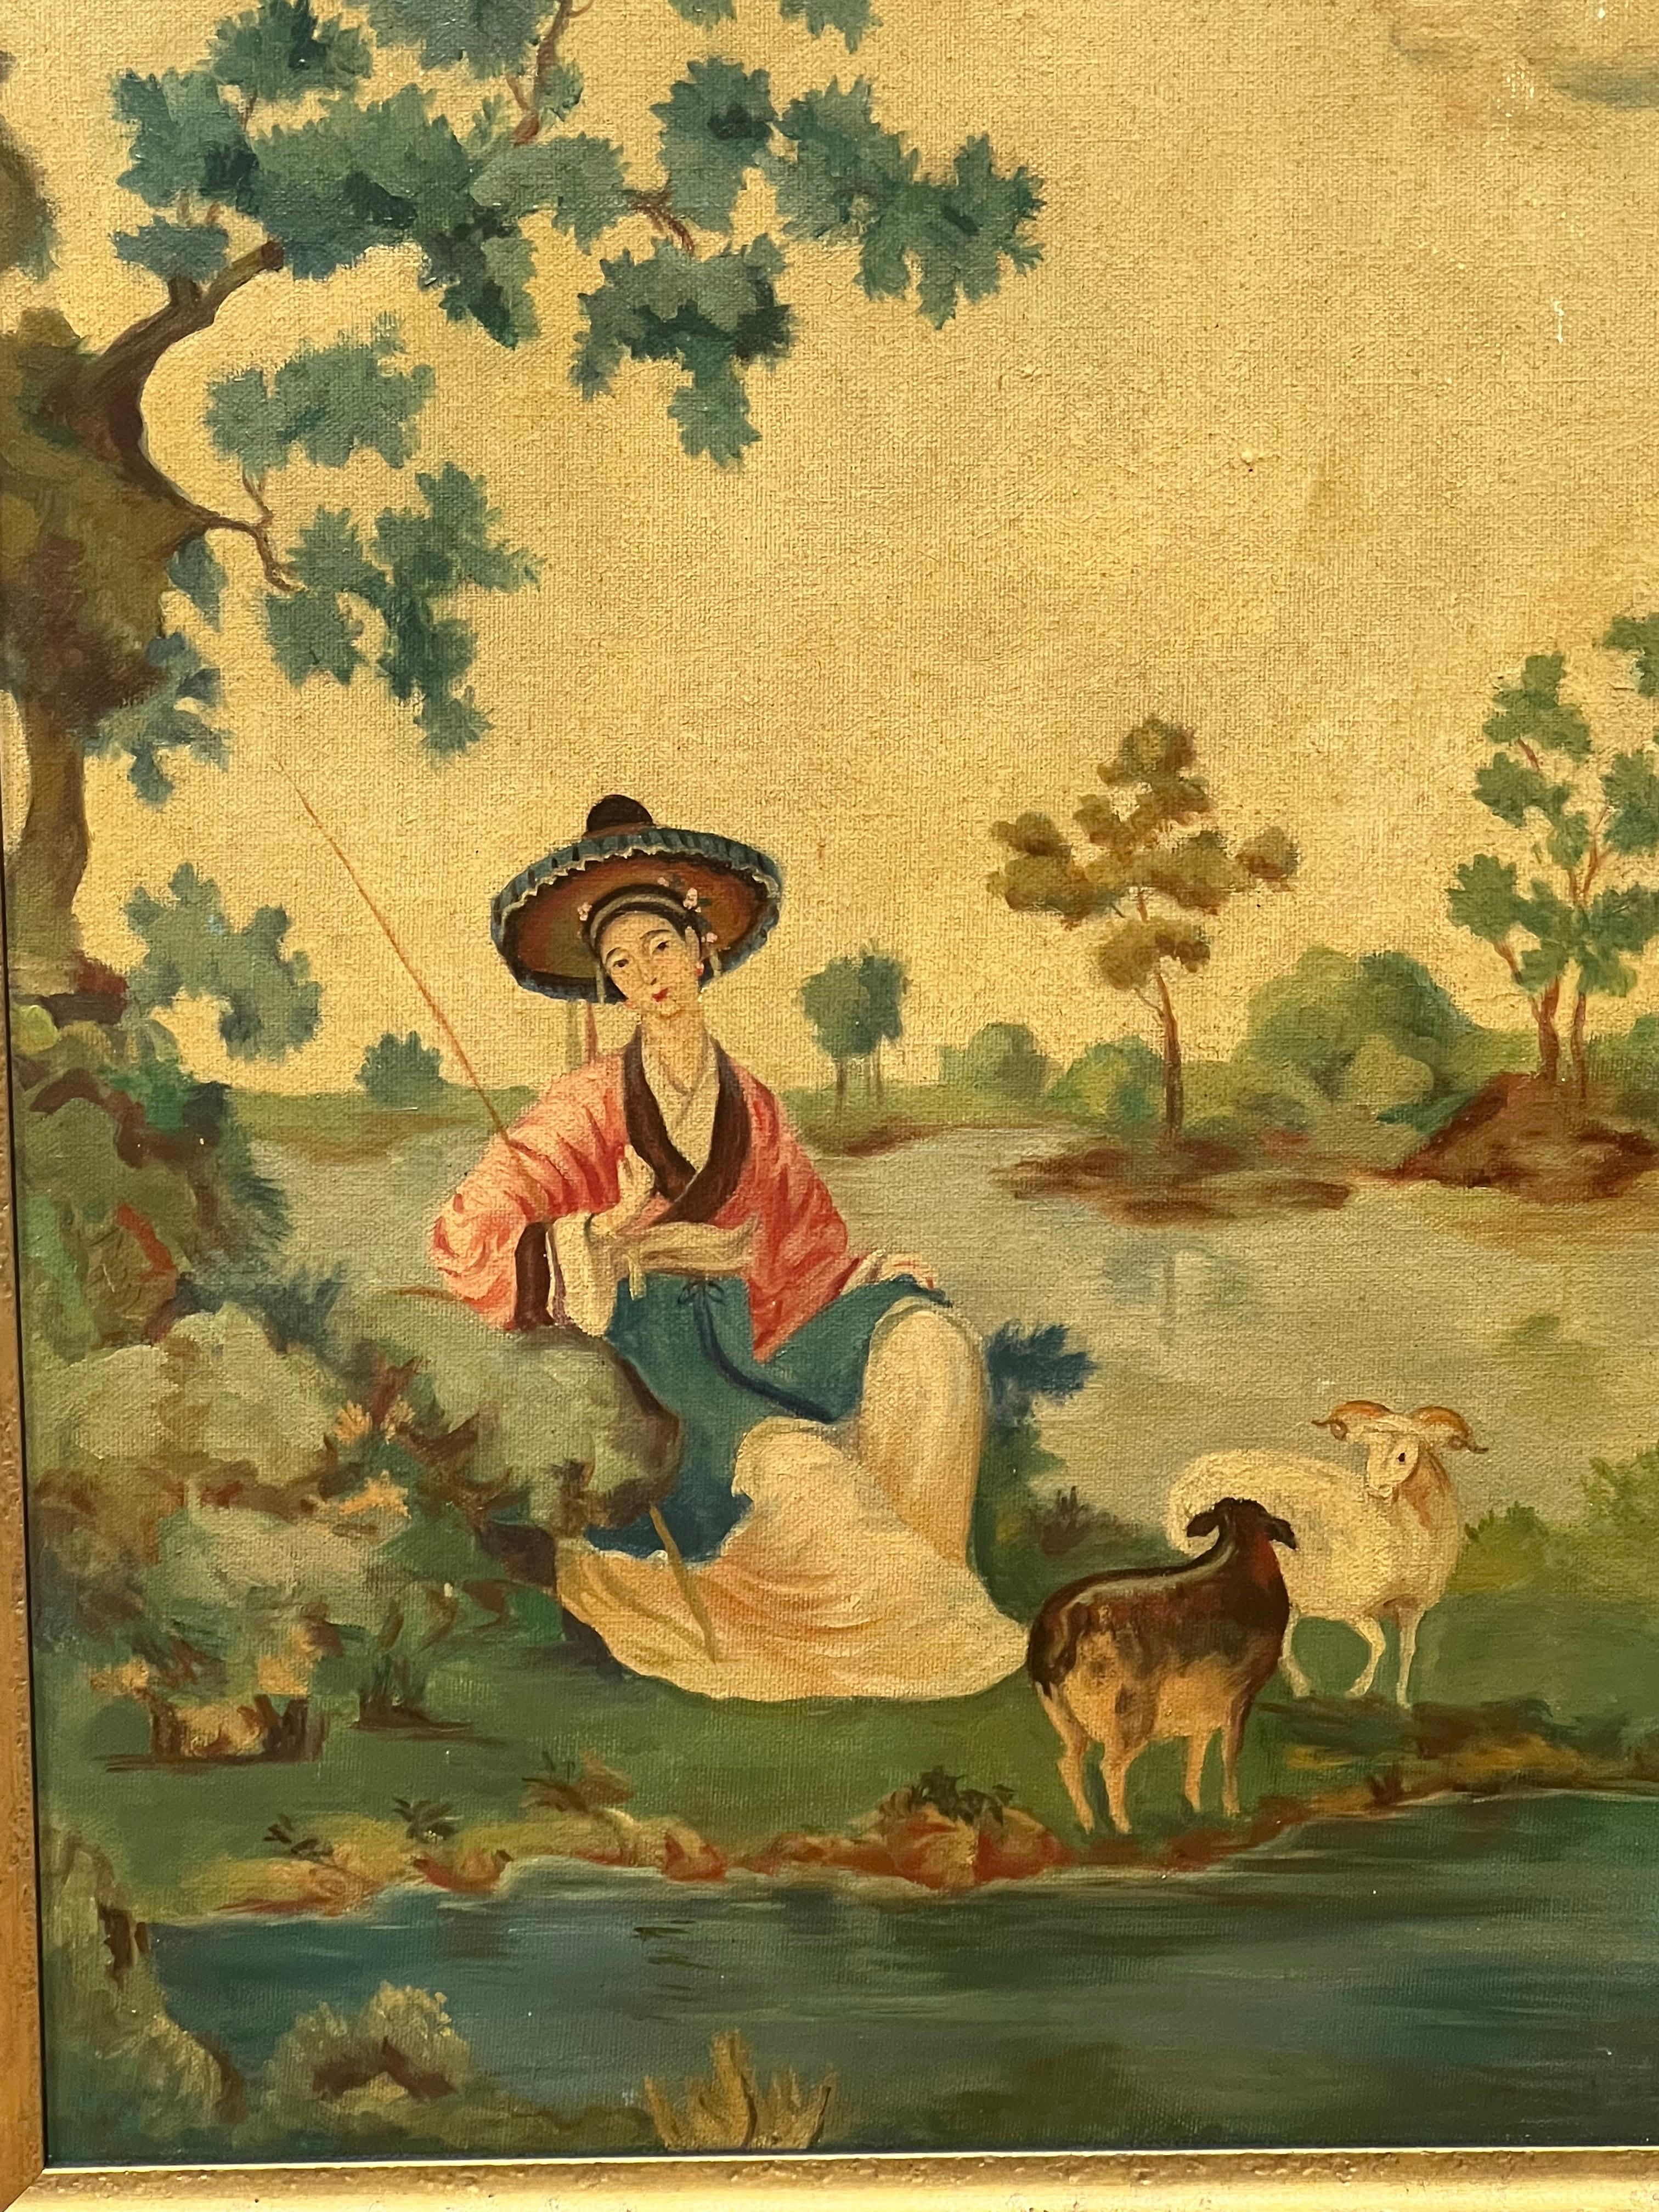 This peaceful pair of 19th Century paintings show two rural scenes from the Chinese countryside. One is a shepherd sitting by the river, while the other has the main character sitting on a small boat. Both share the same gentle and calm expression.